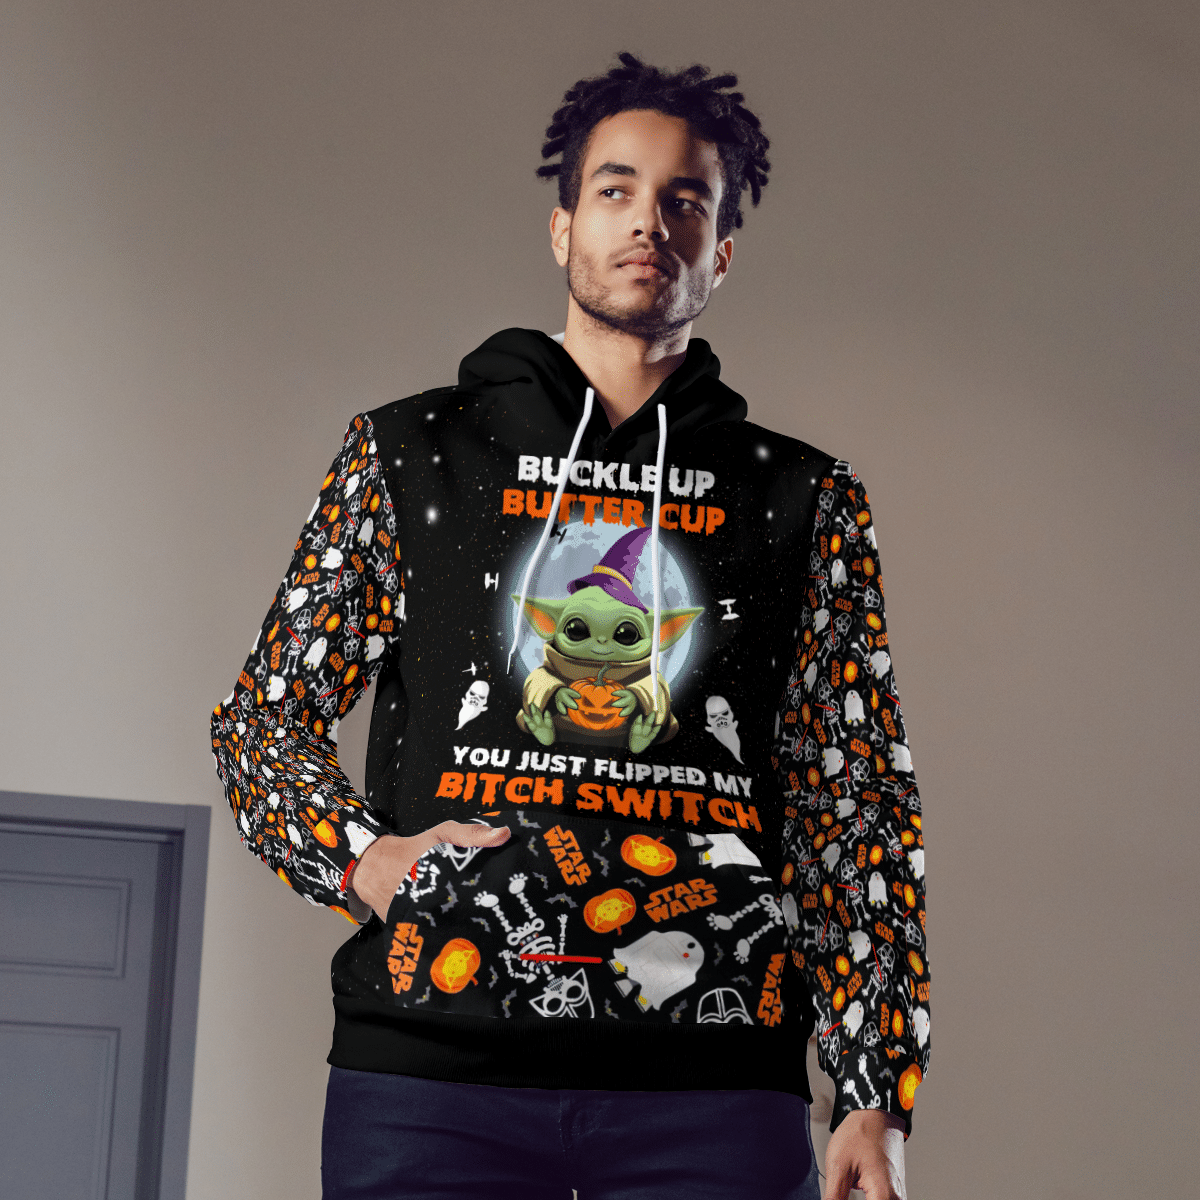 Baby Yoda buckle up butter cup you just flipped my bitch switch 3d hoodie 2.3